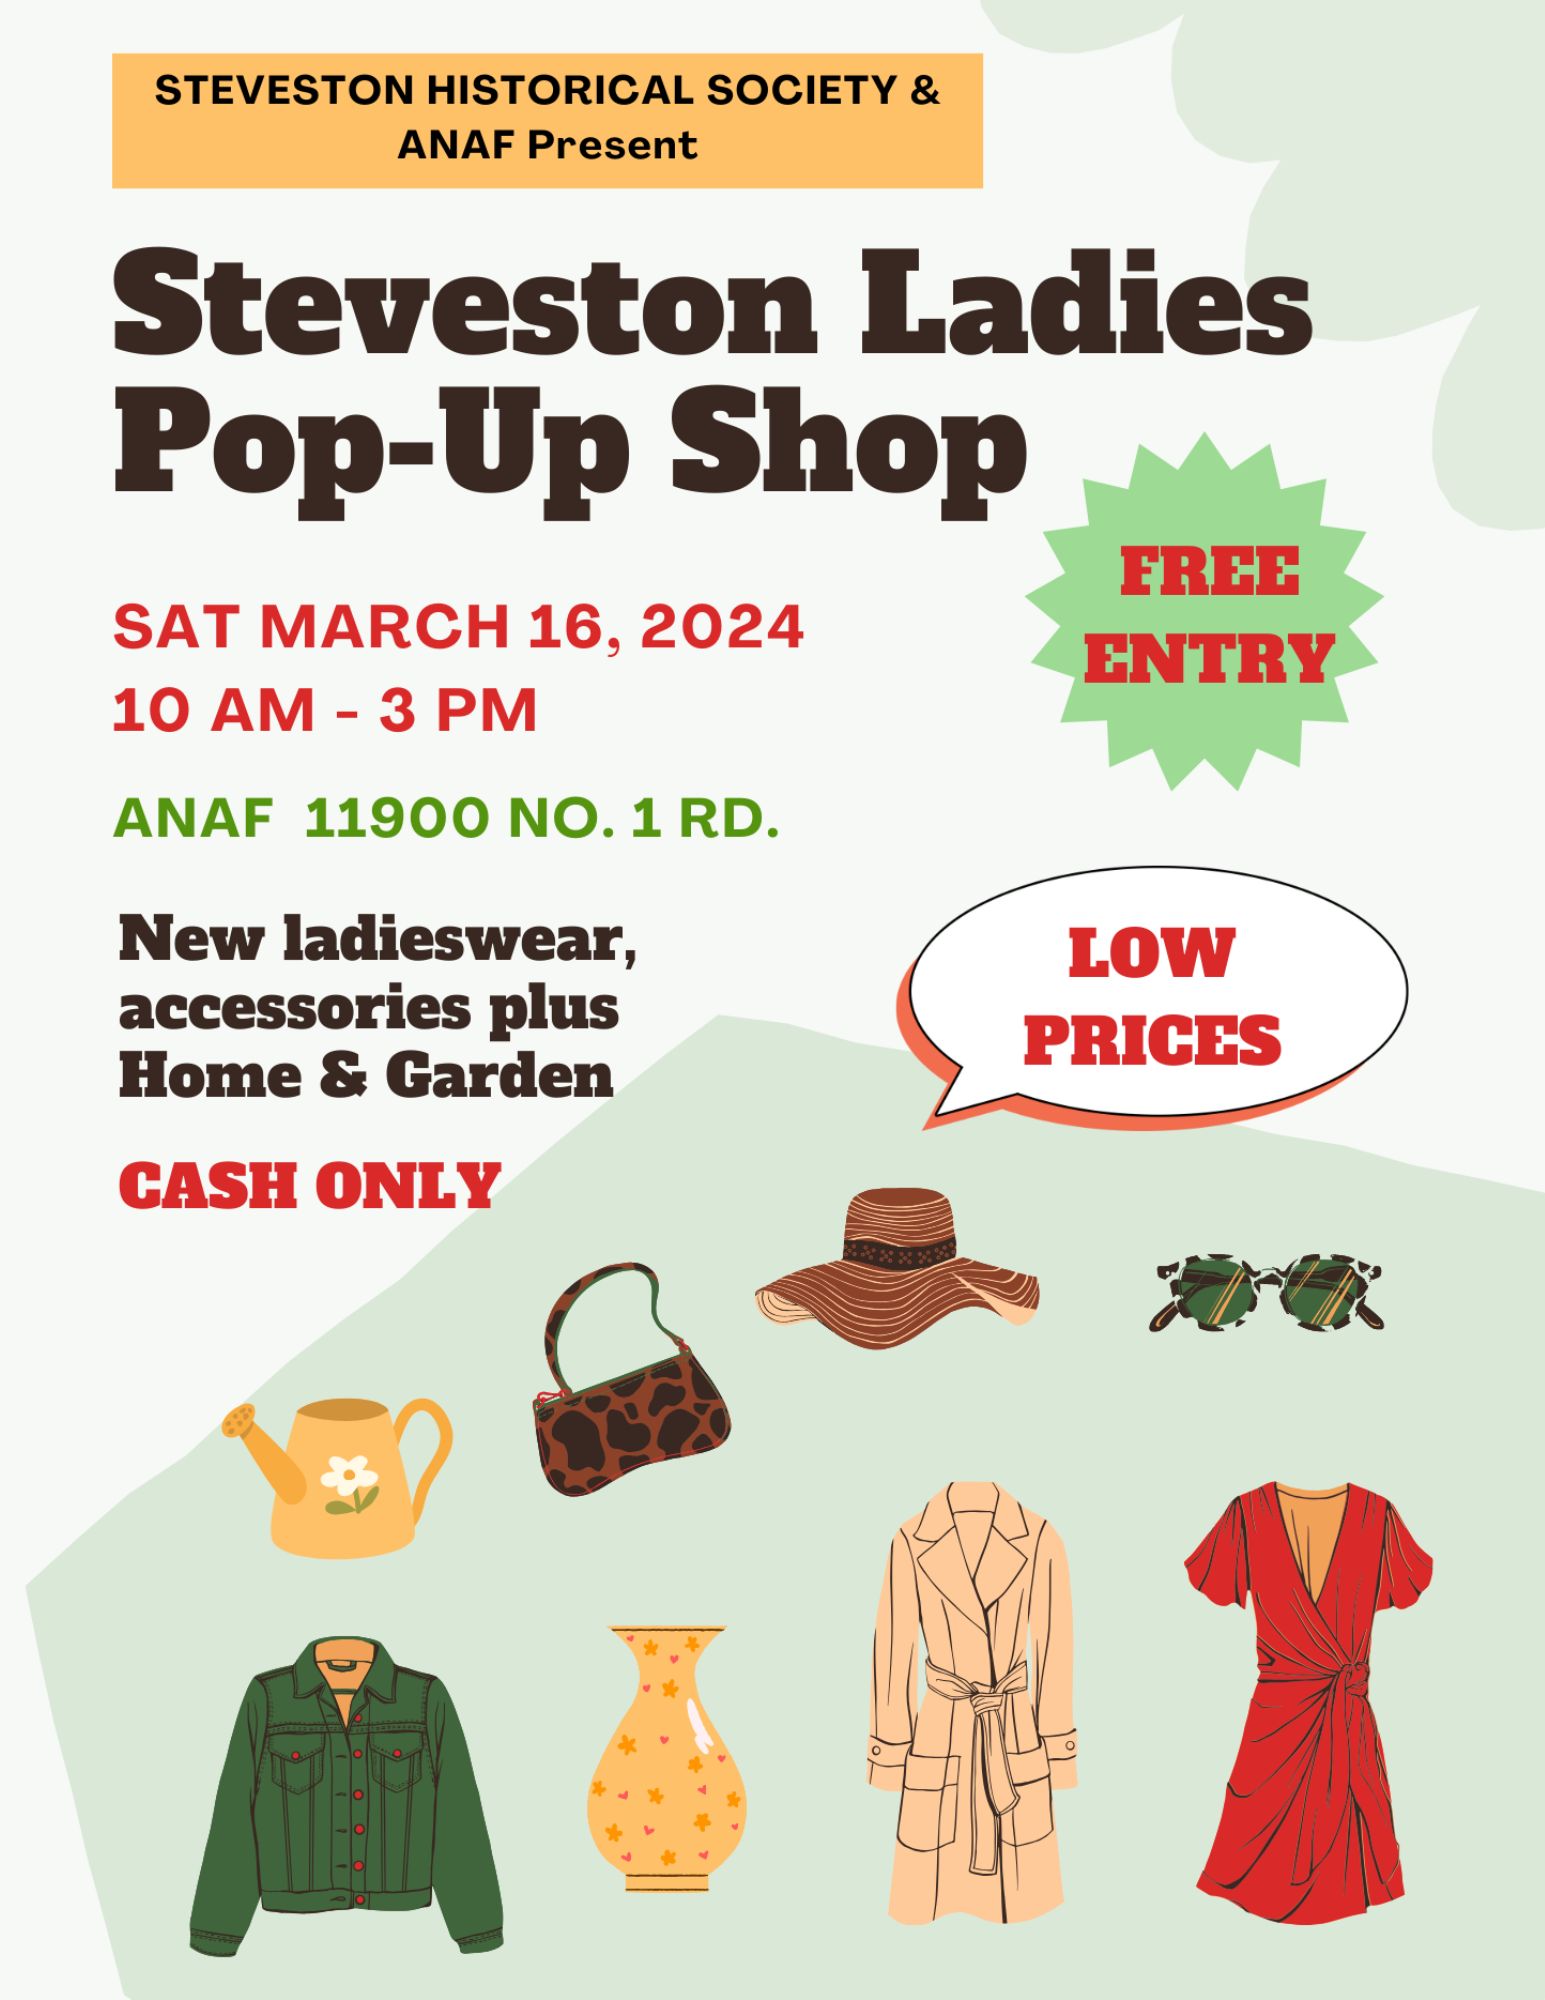 Steveston Historical Society & ANAF Present, Steveston Ladies Pop-Up Shop. Saturday, March 16, 2024 from 10am - 3pm at ANAF (11900 No. 1 Rd), free entry. The text is accompanied by clip art pictures of a dress, coat, sunglasses, hat, handbag, watering can, vase, and jean jacket.